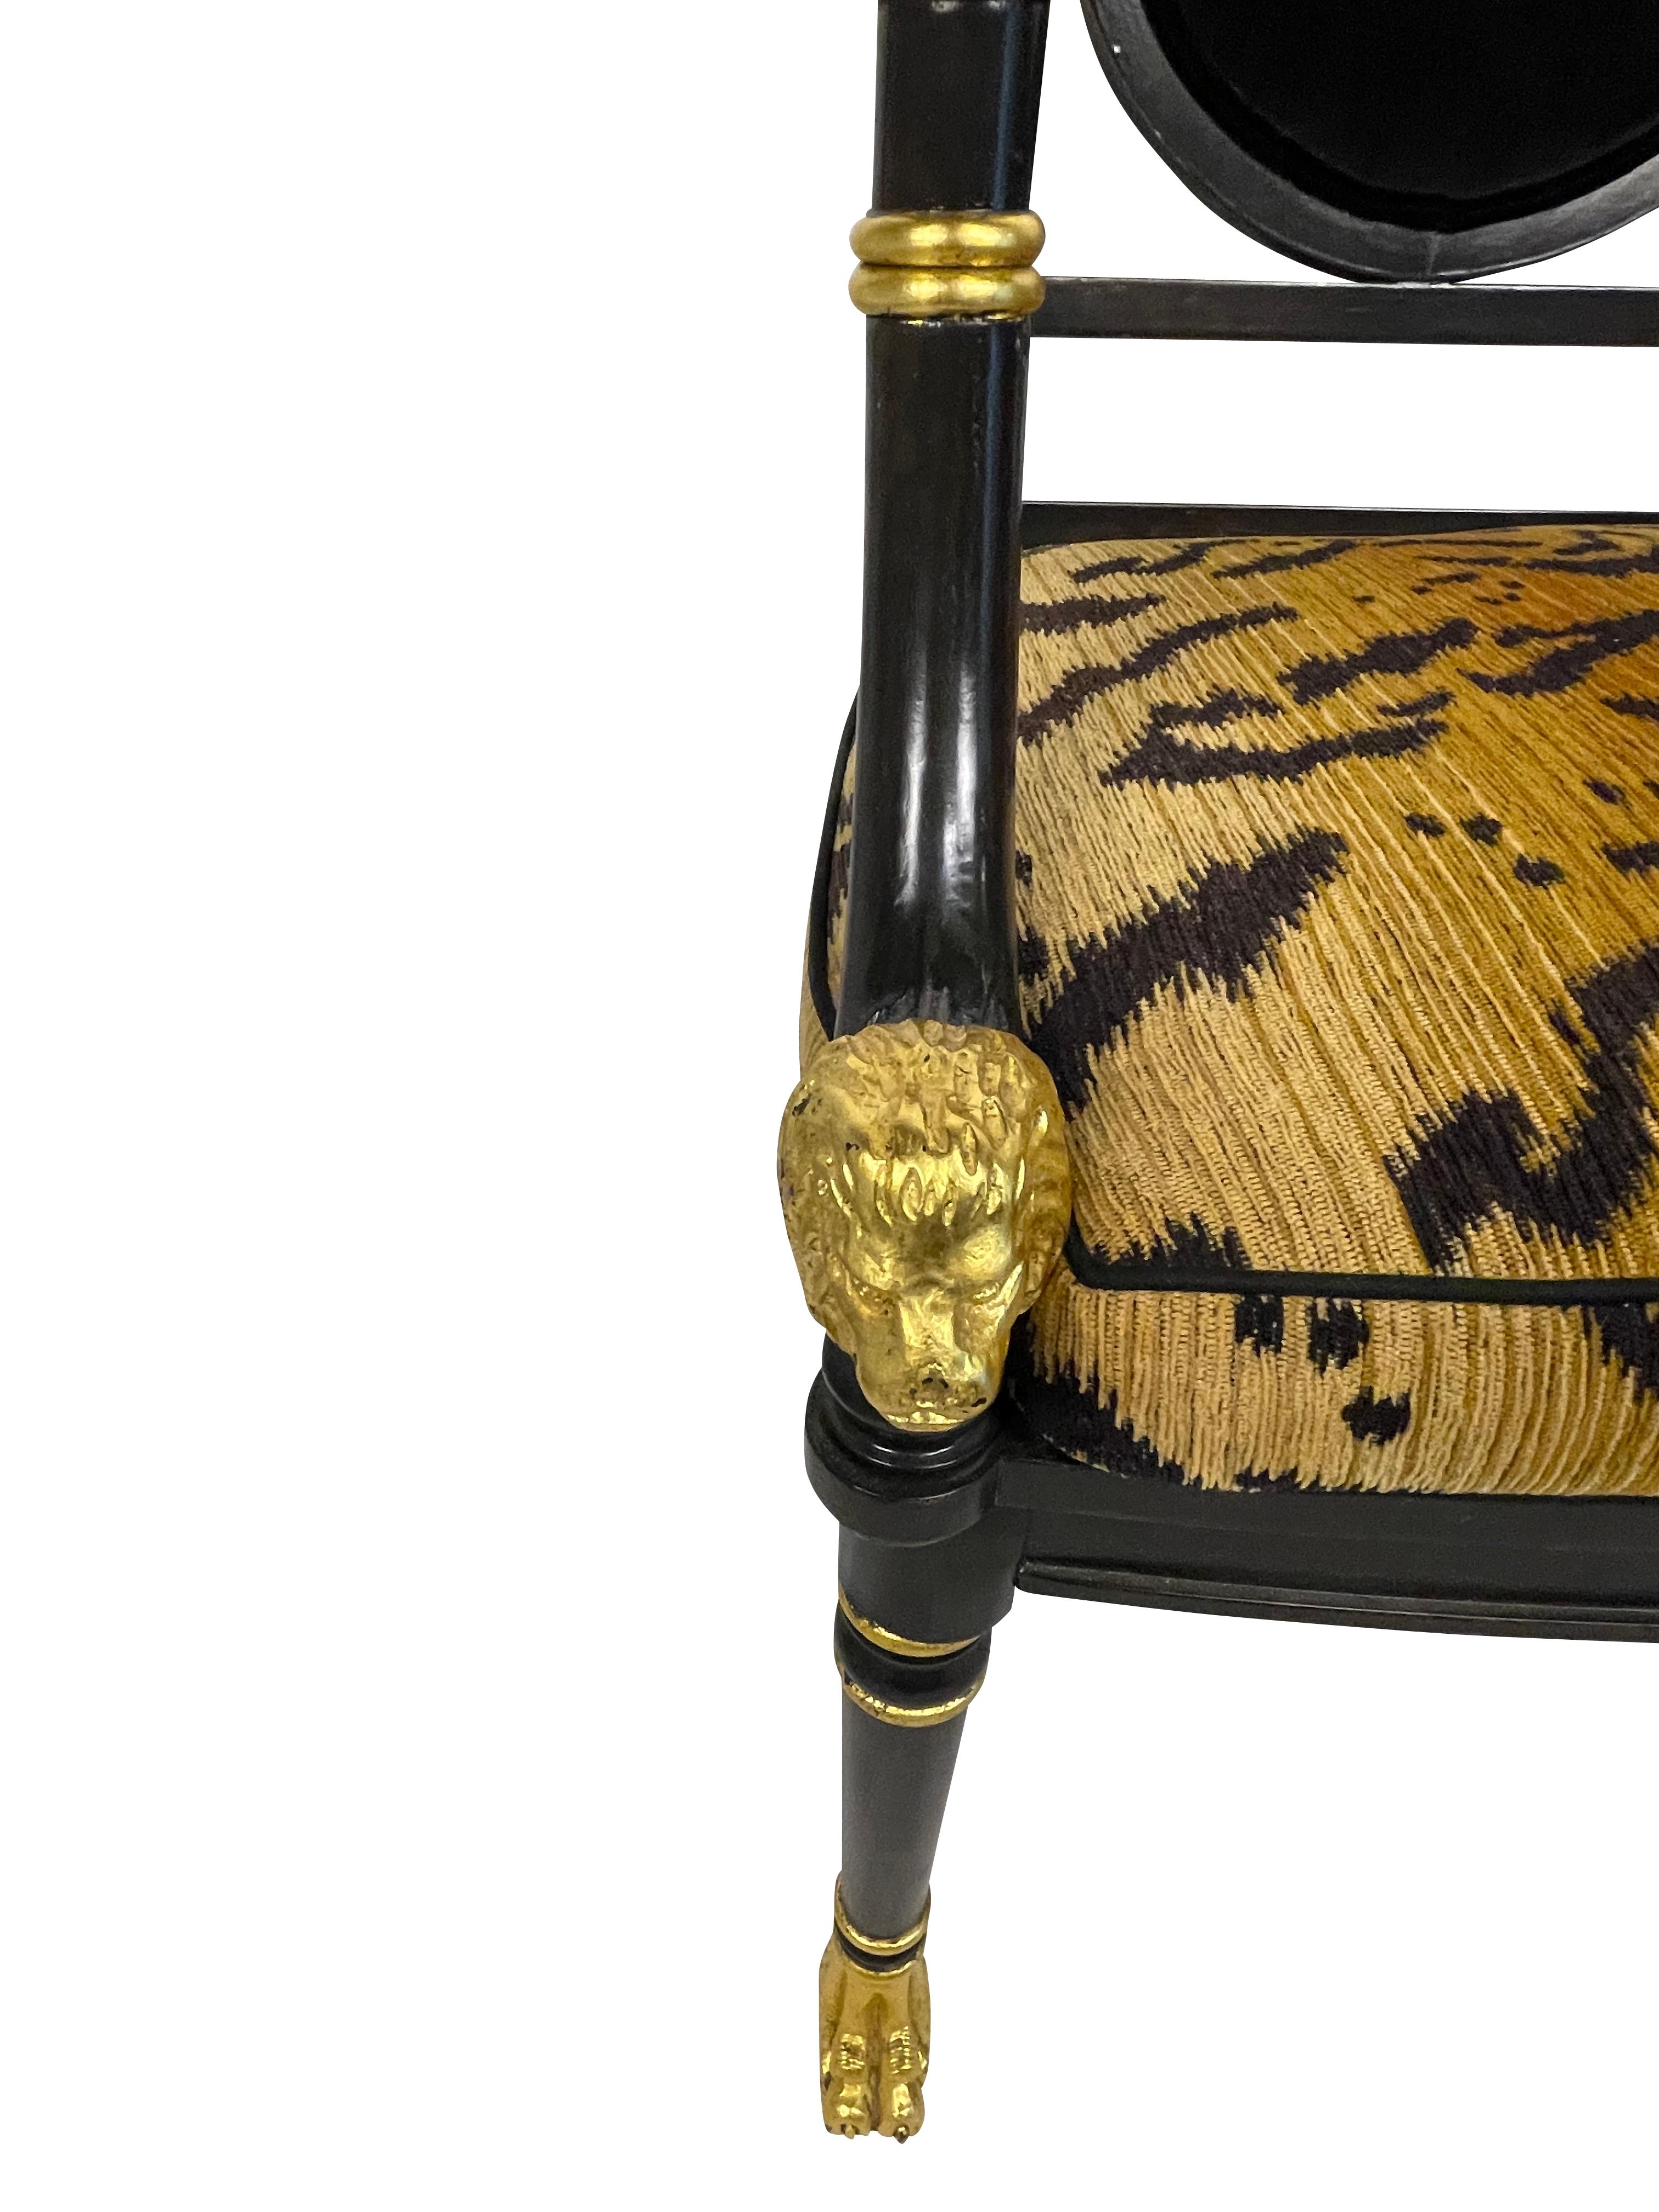 Regency Style Black Ebonized and Gilt Decorated Chairs with Animal Print Cushion 1